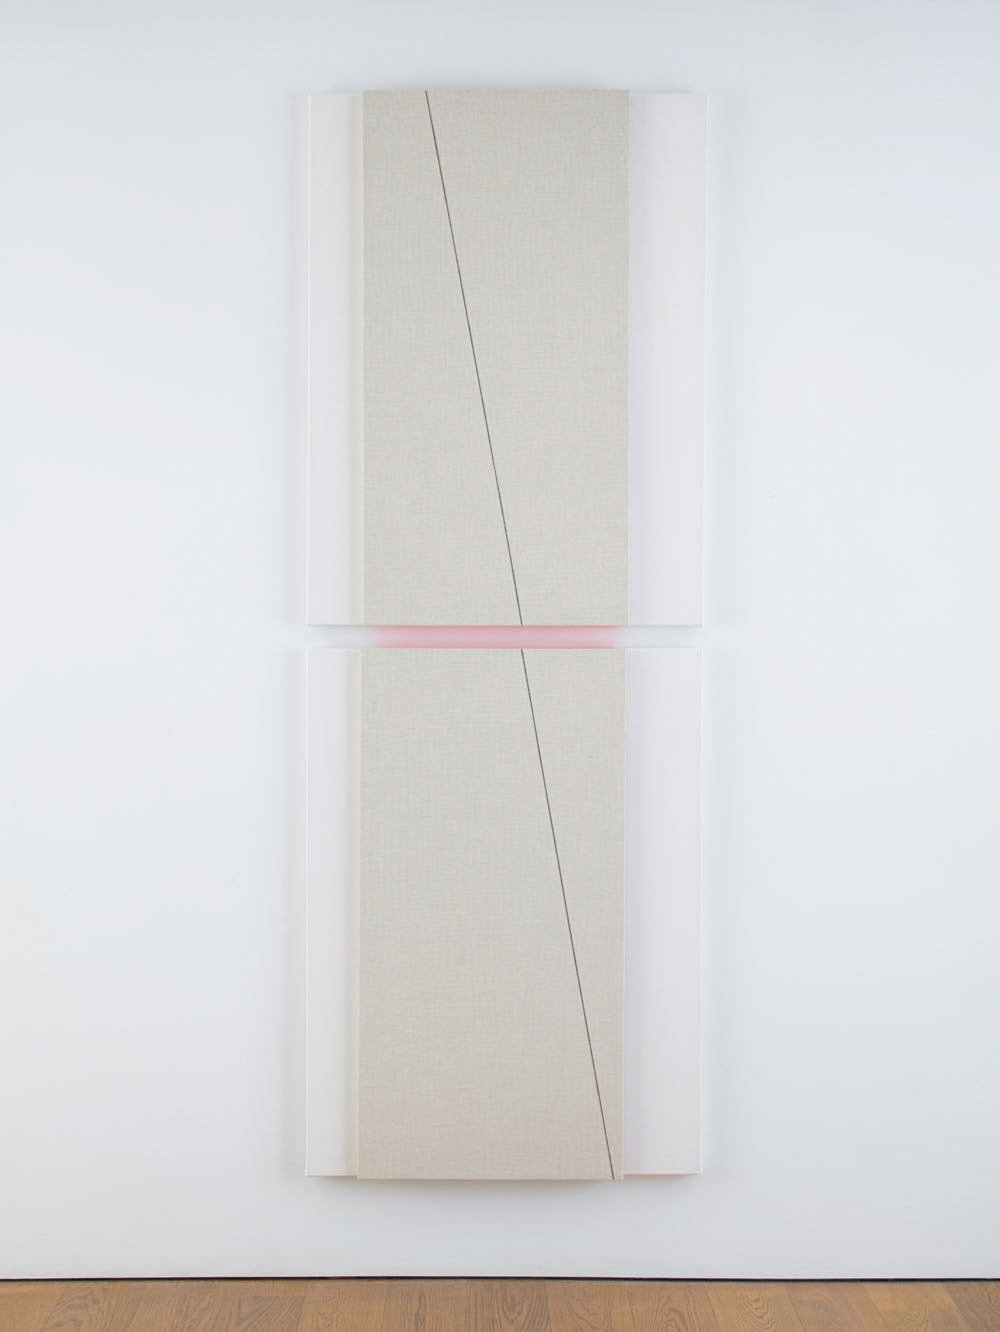  Vertical into Crescendo (light), 2014 --&nbsp;Acoustic absorber panel and acrylic paint on canvas 2 parts: 48 x 36 inches each, 98.25 x 36 inches overall 